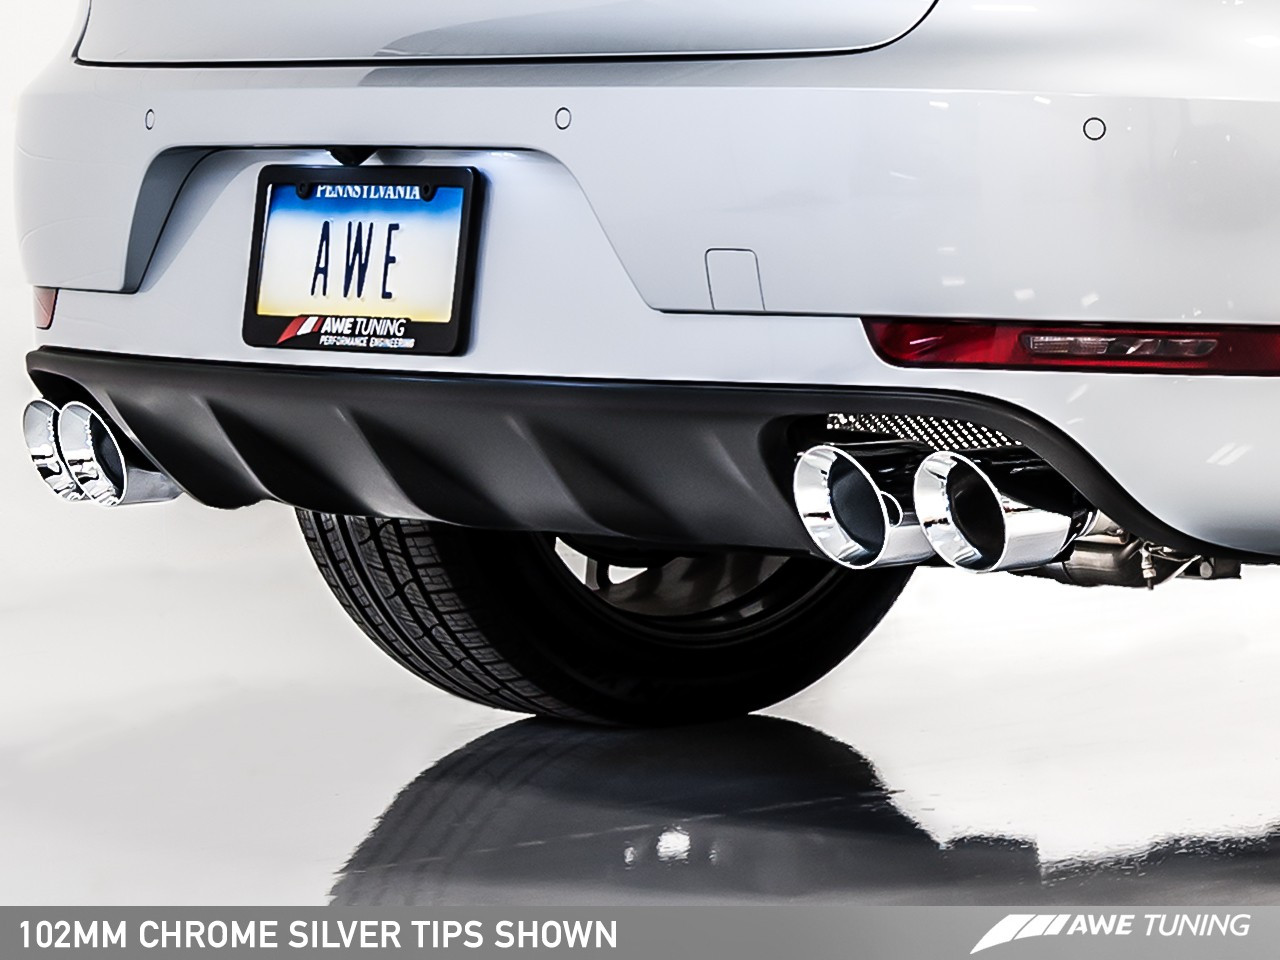 AWE Tuning Porsche Macan Turbo Track Edition Exhaust - With Chrome Silver Tailpipes